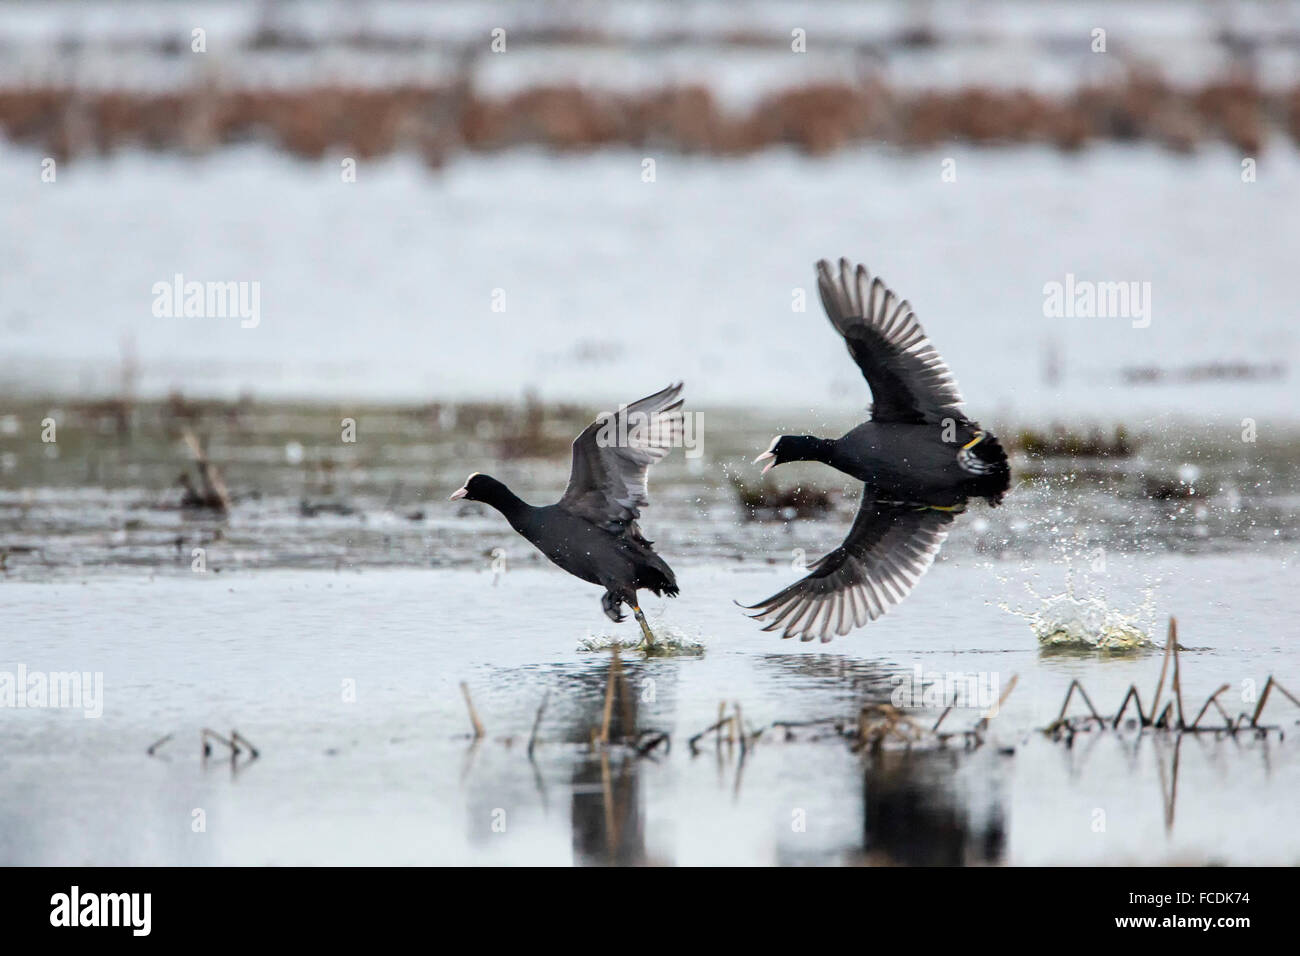 Netherlands, Ouderkerk aan de Amstel, Coots chasing each other in mating season Stock Photo